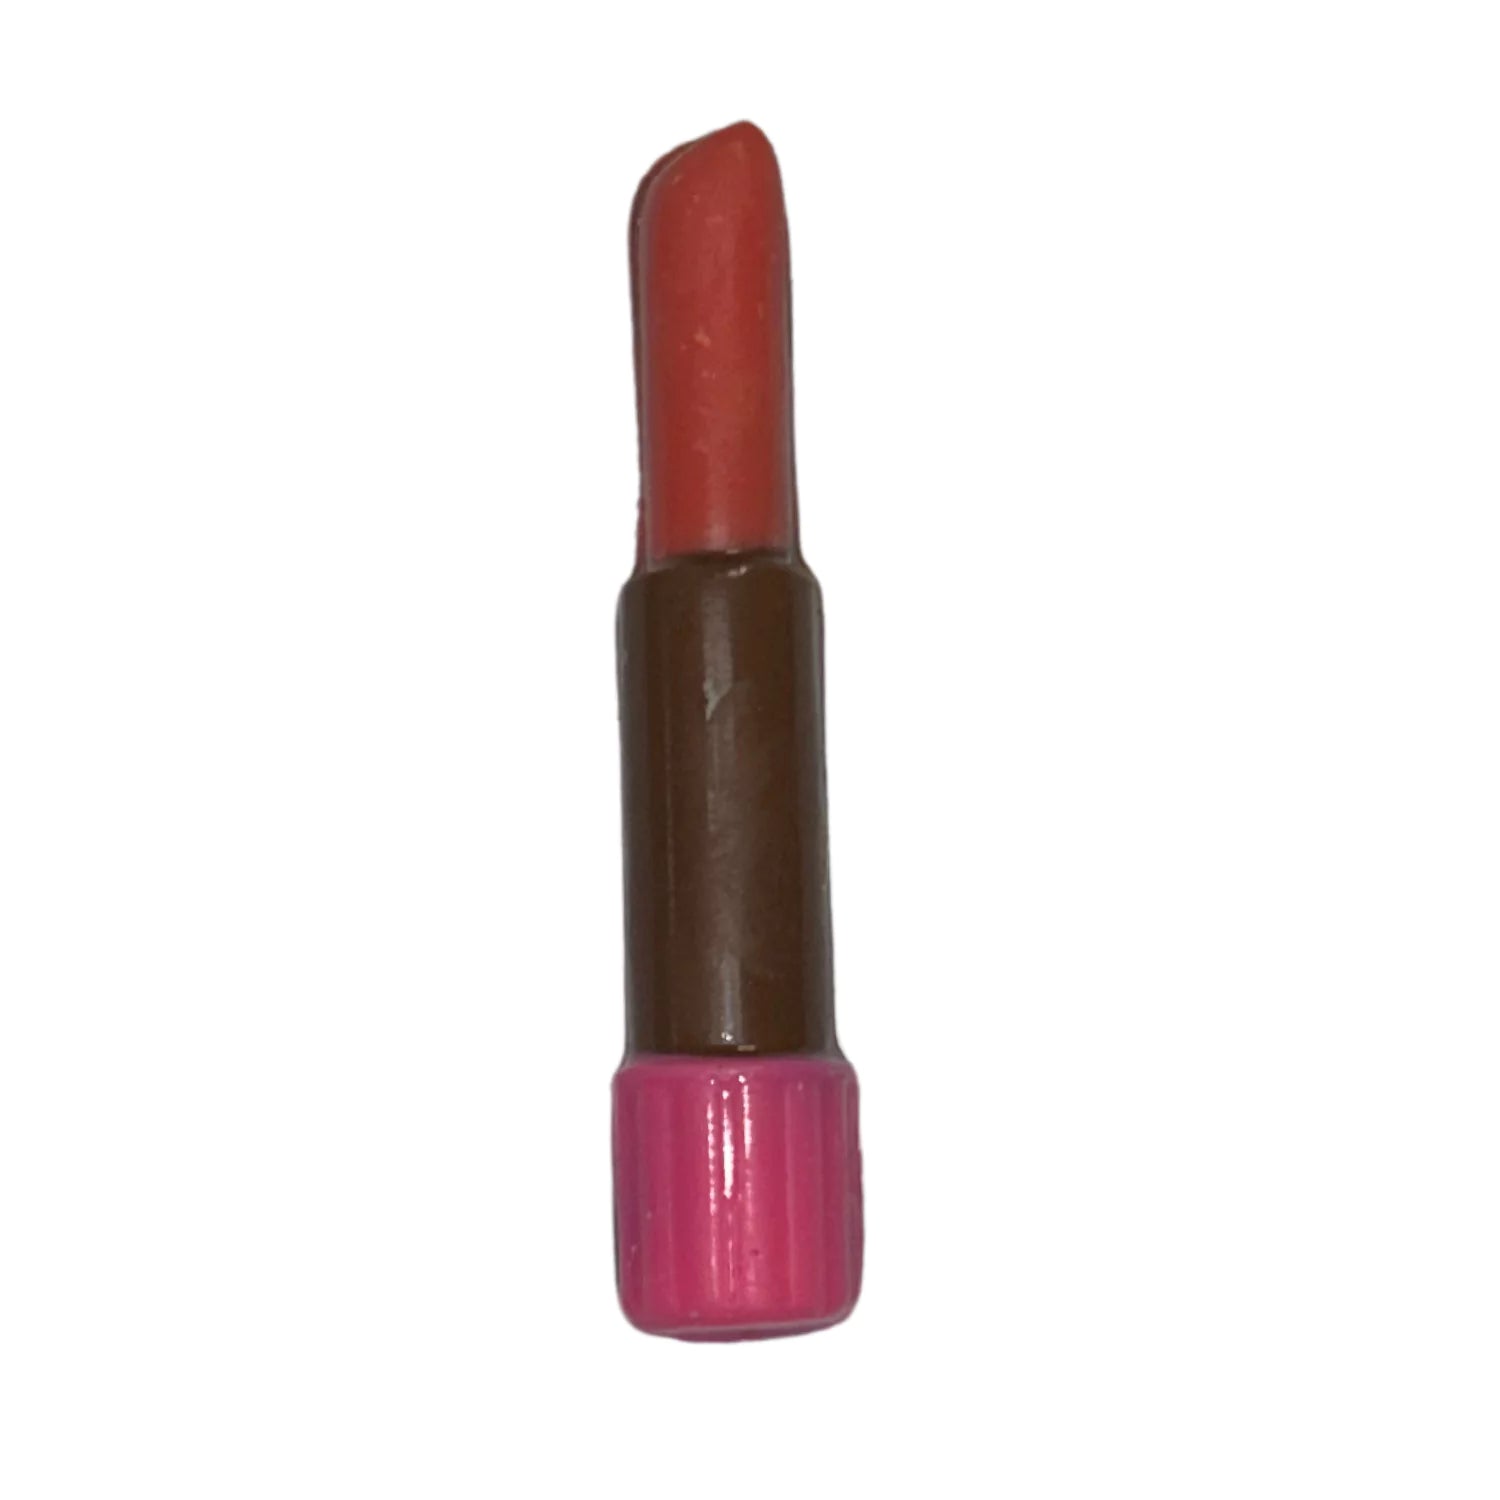 Assorted Colors Lipstick White and Chocolate Milk Chocolate 0.4 oz each Candy Red Milk Chocolate